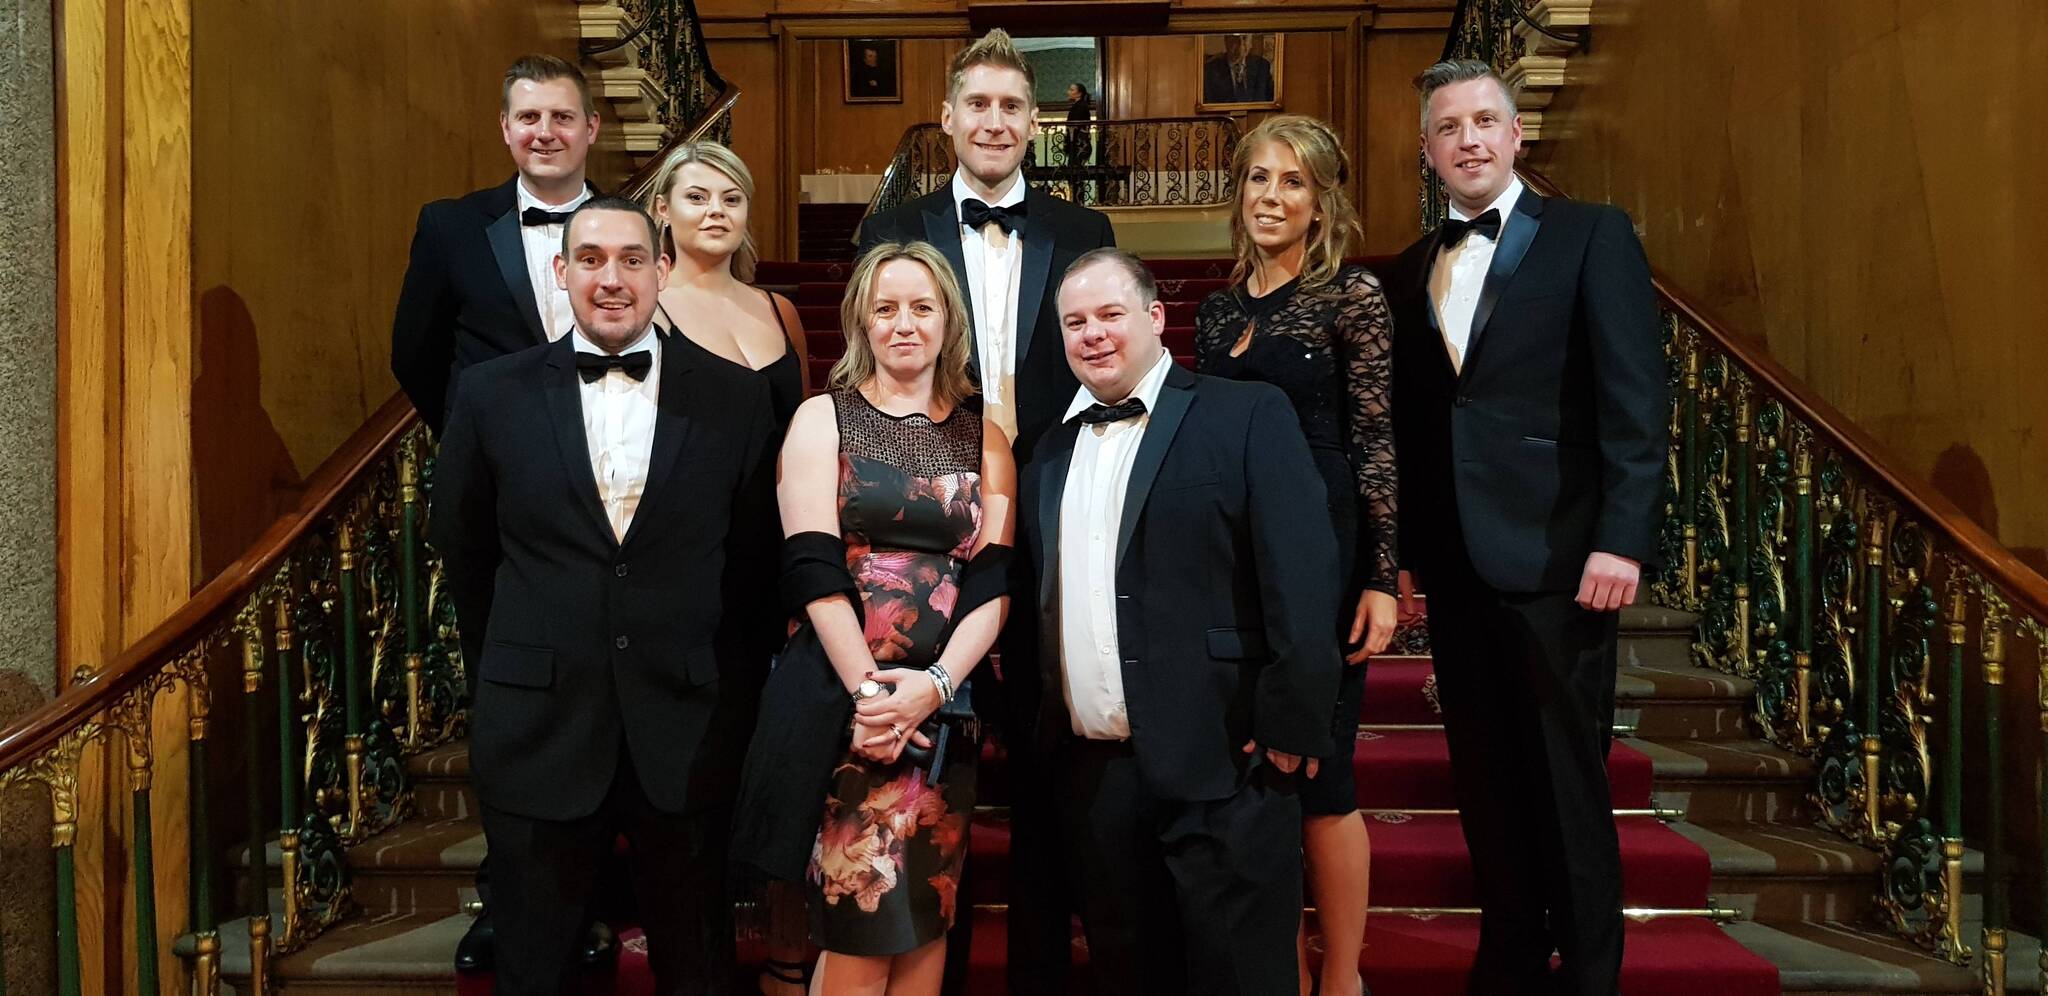 The Polypipe Team at the CCISY Awards 2018